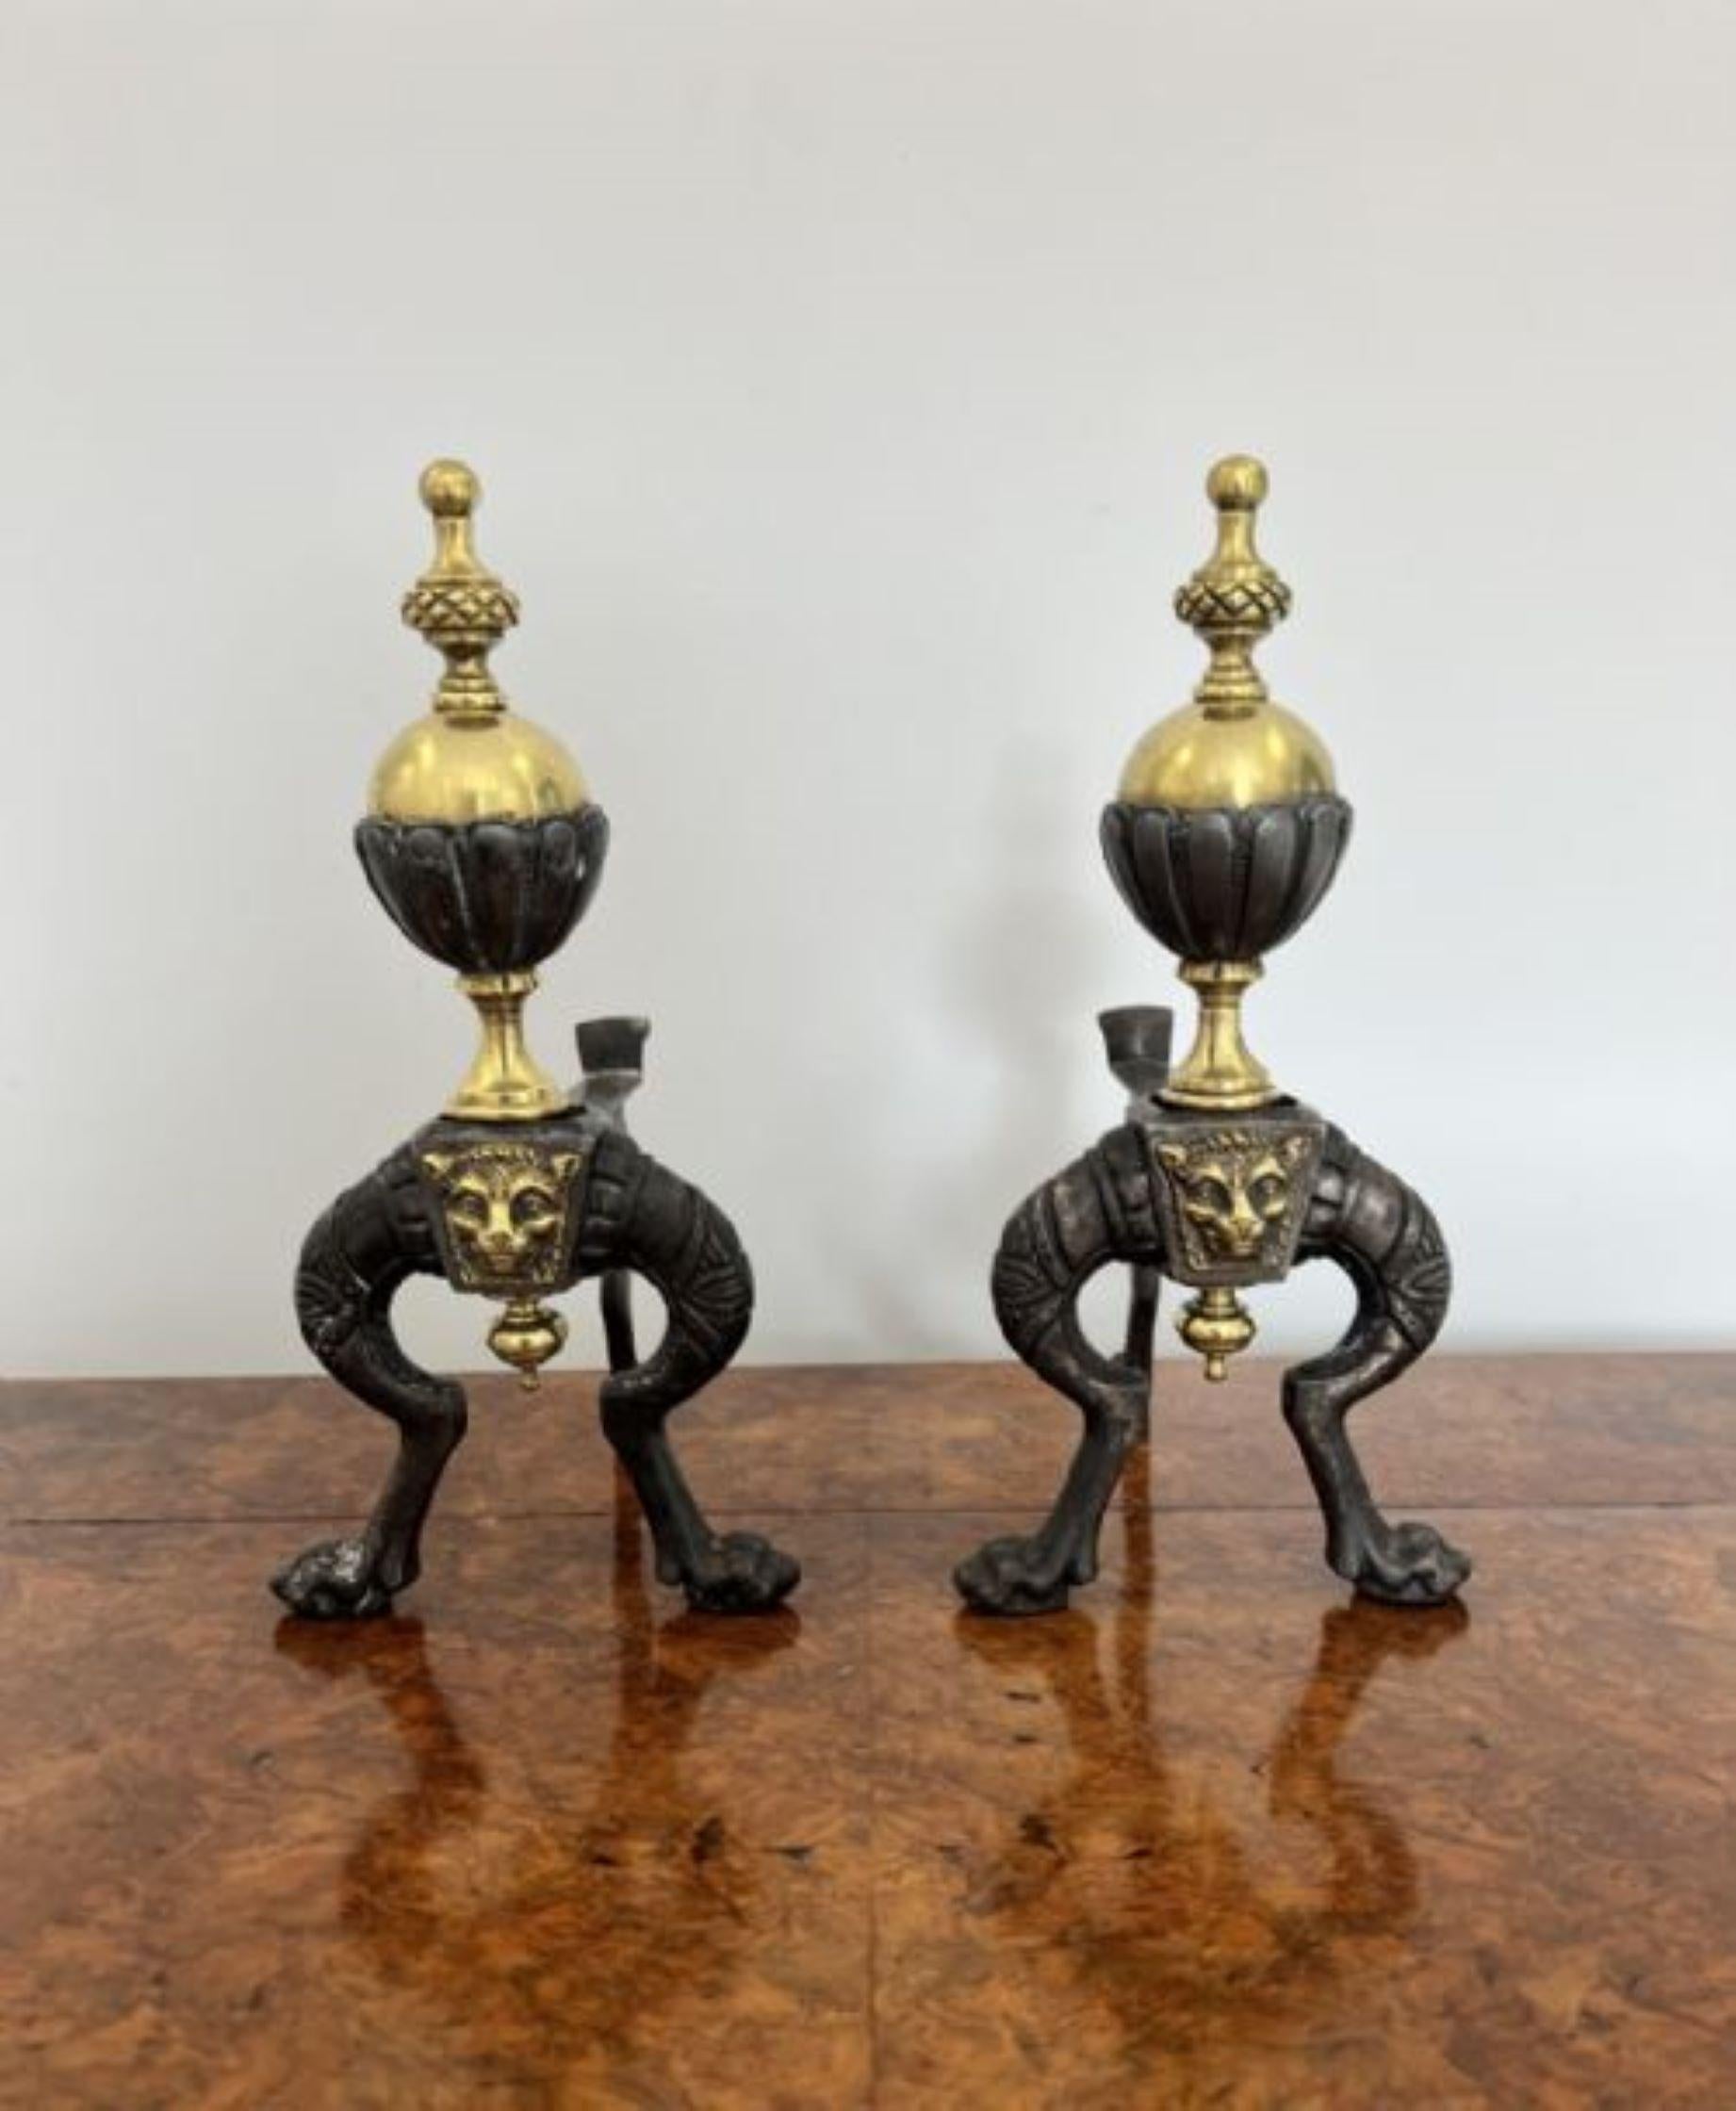 Pair of quality antique Victorian brass and iron fire dogs having a quality pair of brass and iron fire dogs with turned finials above a brass ball, brass lions heads to the shaped iron stands with claw feet. 